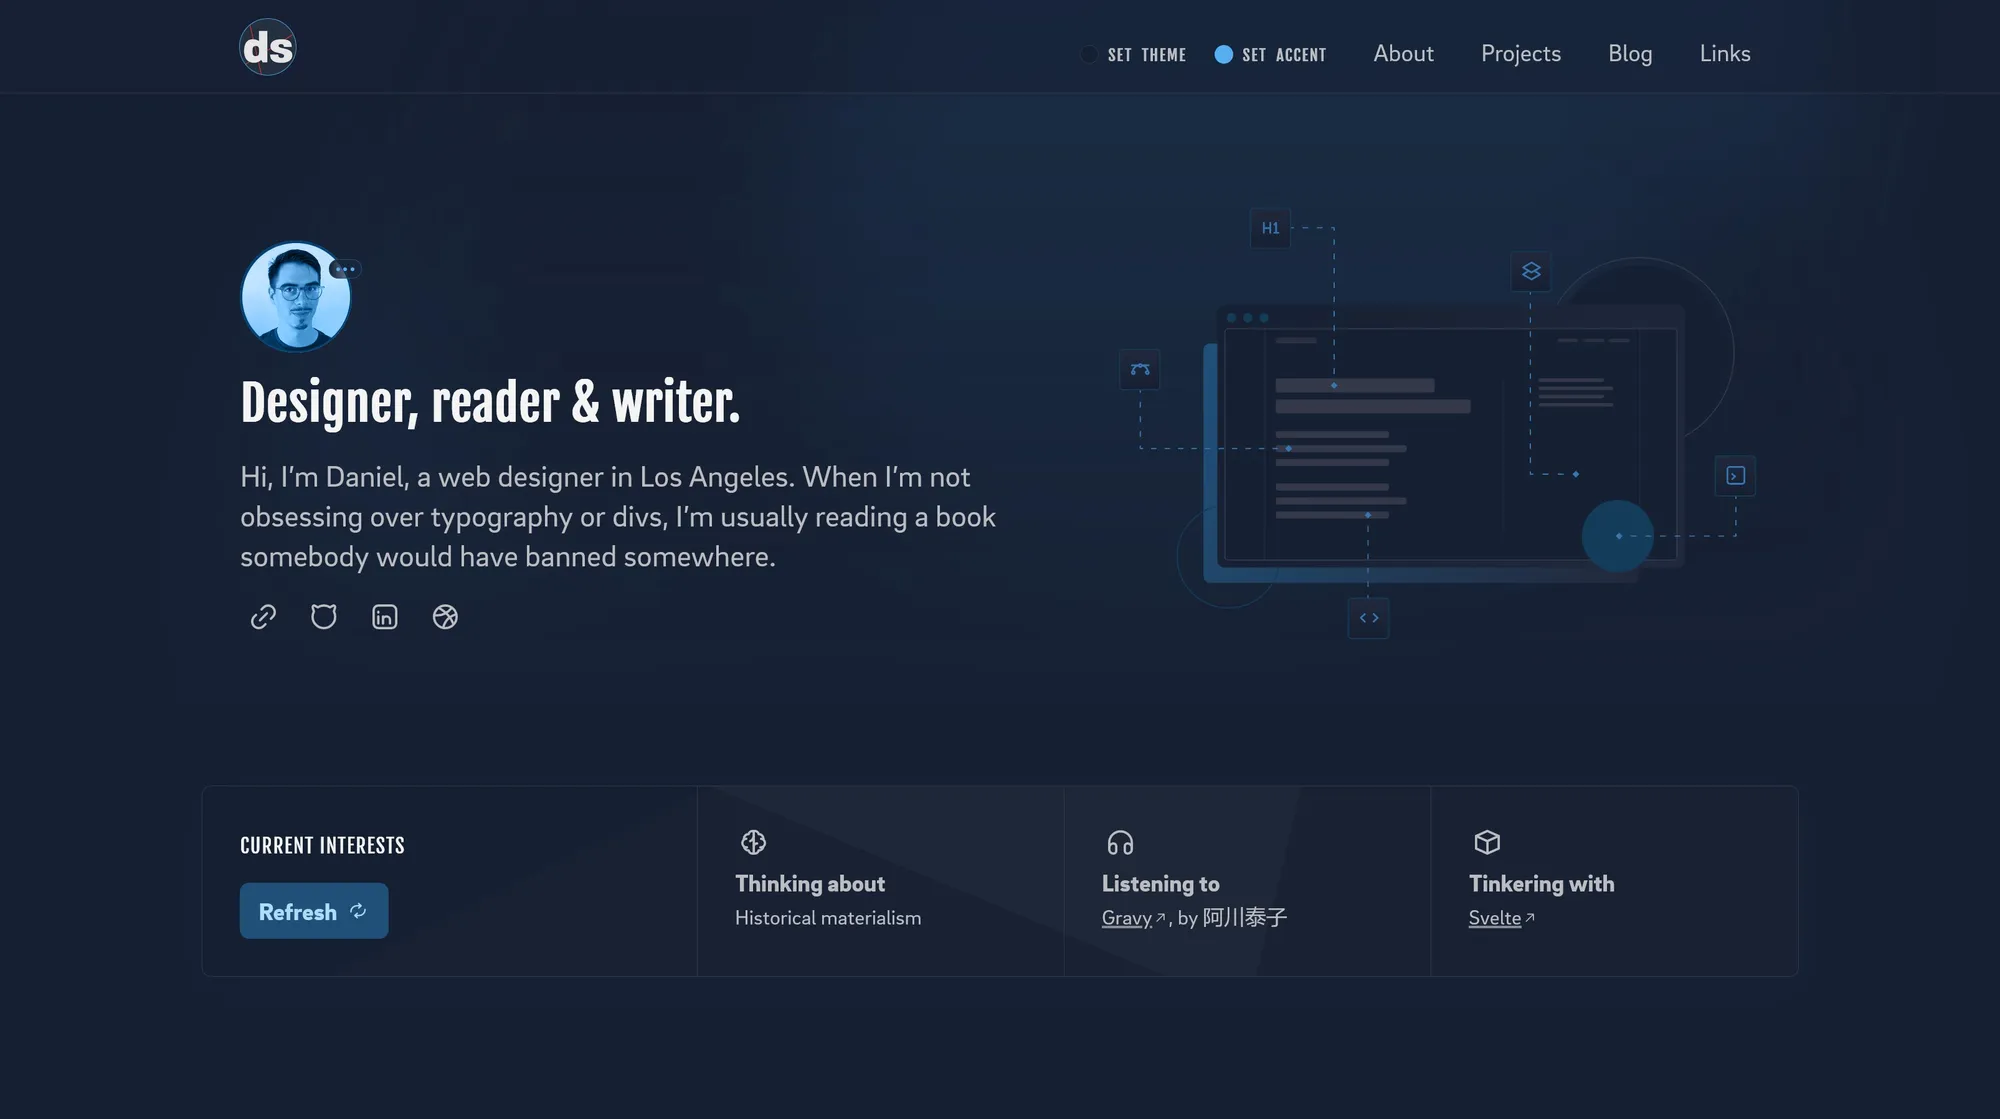 Home screen of my new site design, a dark theme with an blue accent. The main heading says 'Designer, reader, and writer' and the main focus is a box that shows various current interests.